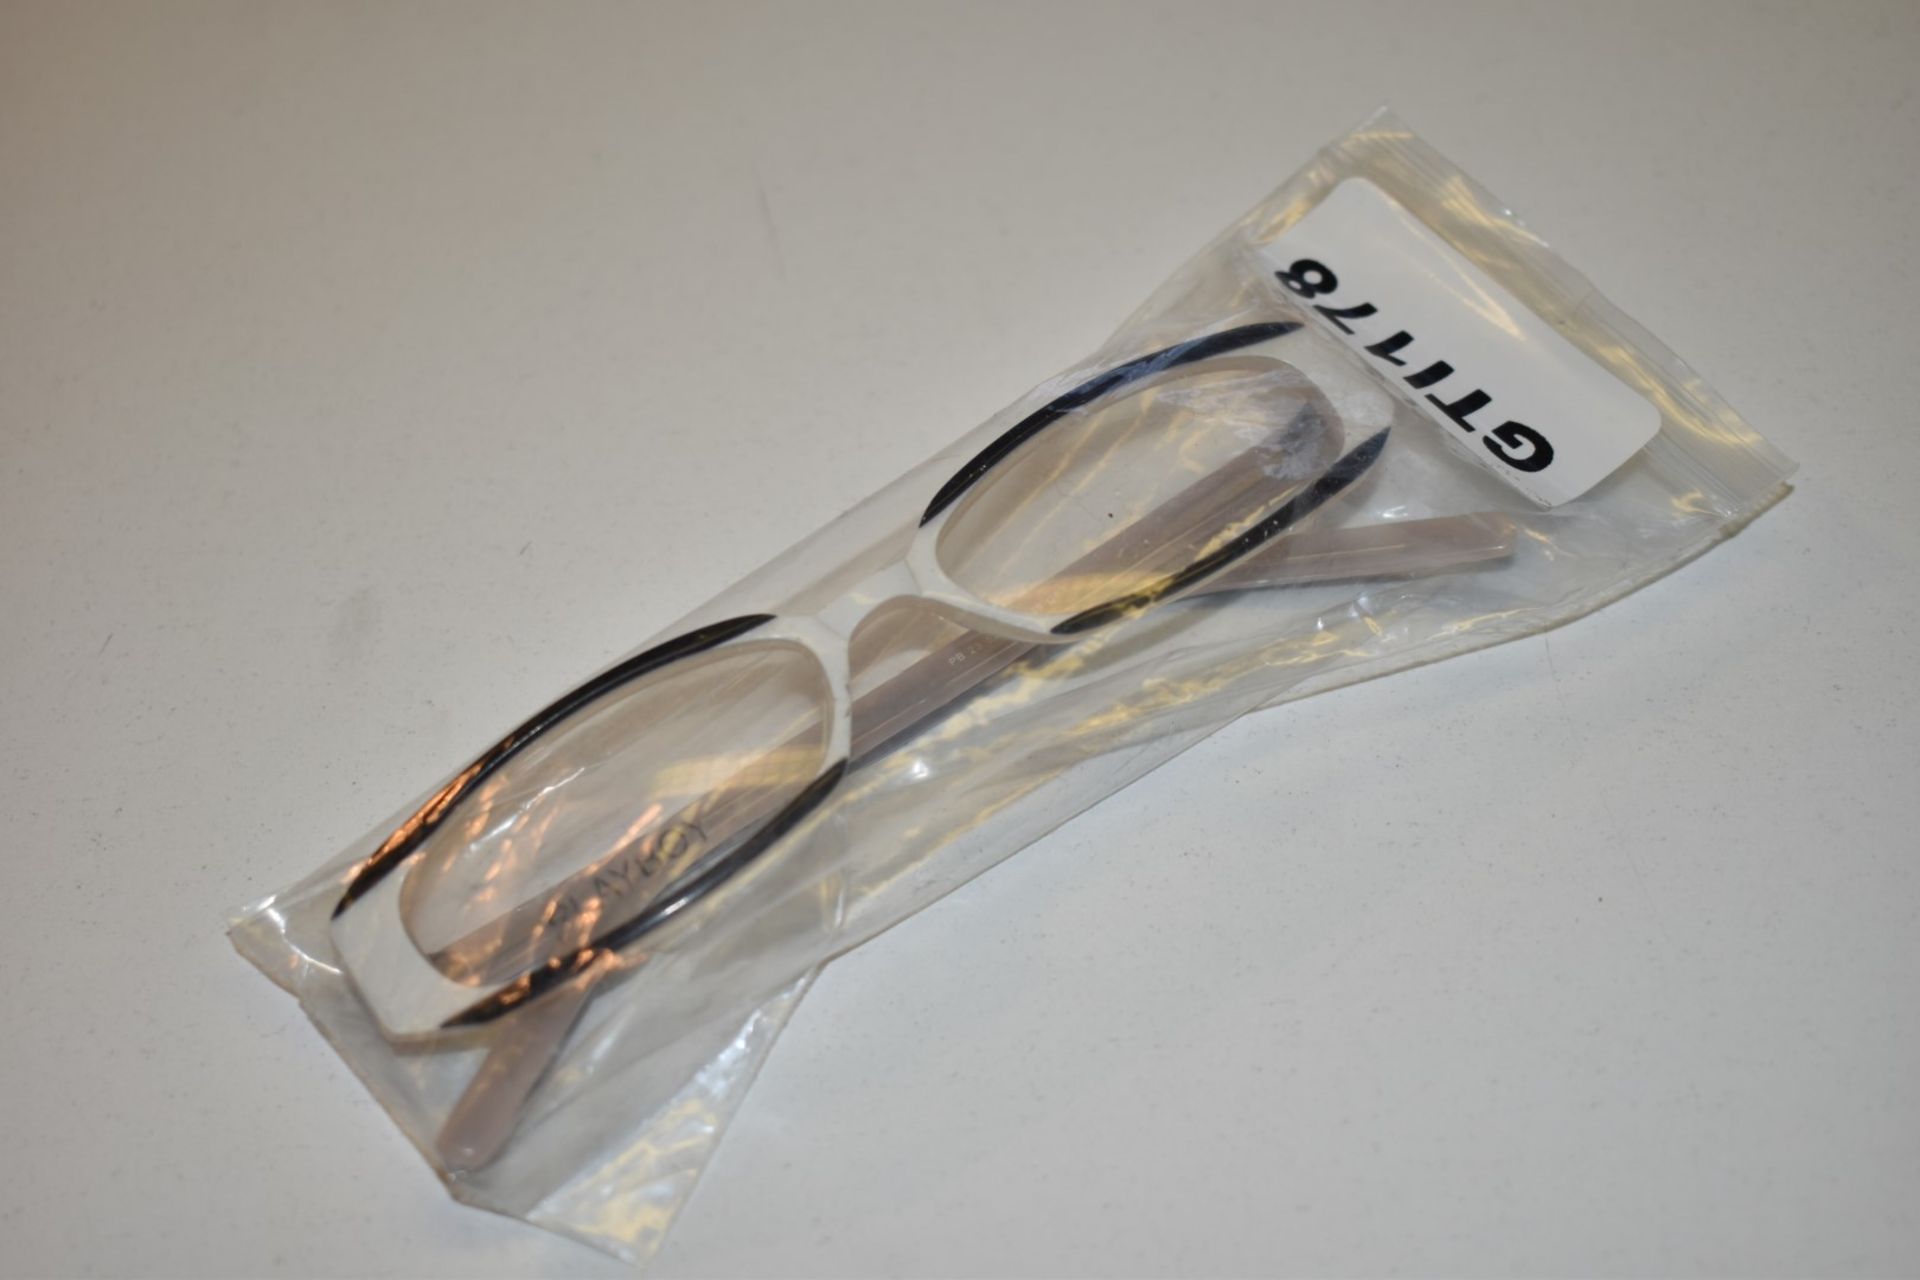 1 x Genuine PLAYBOY Spectacle Eye Glasses Frame - Ex Display Stock  - Ref: GTI178 - CL645 - - Image 12 of 12